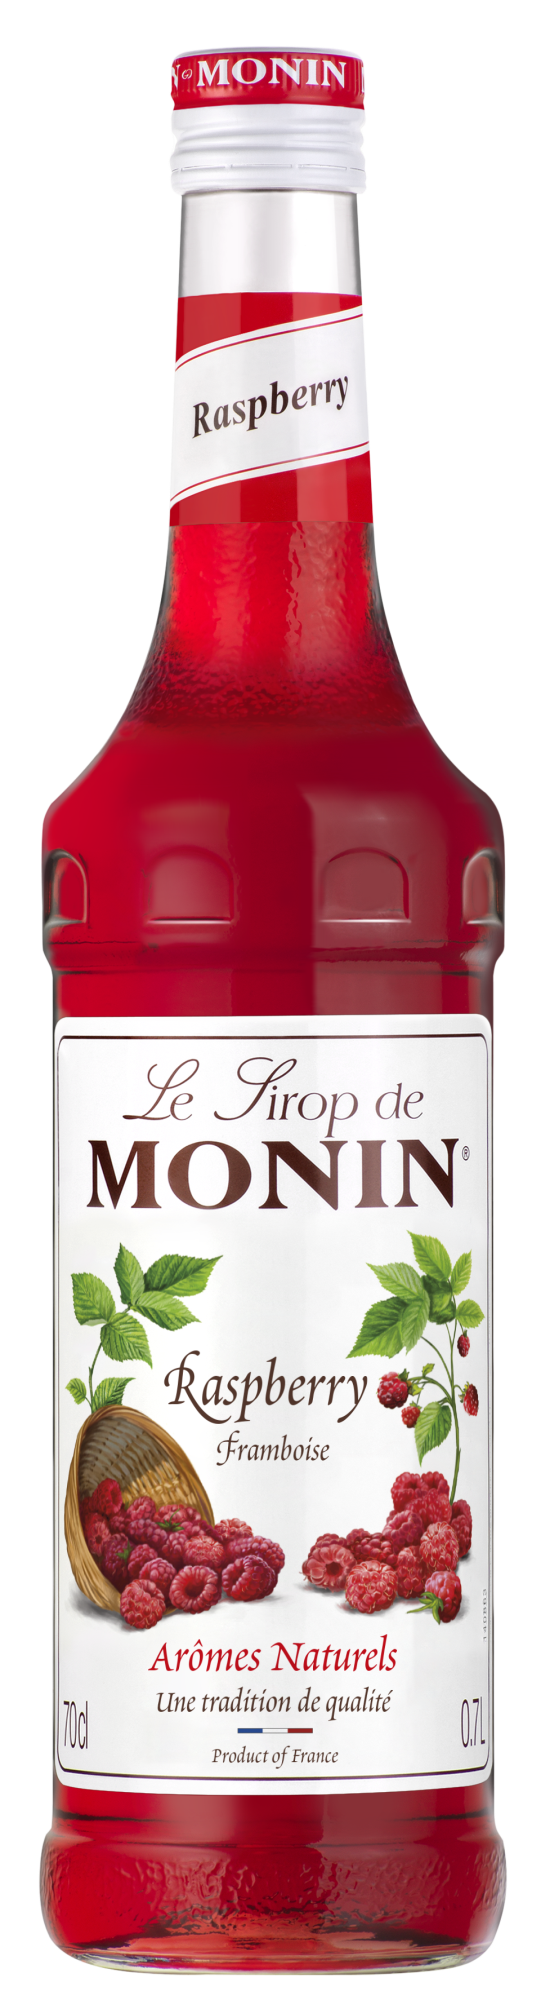 Buy MONIN Raspberry syrup. It is perfect for use in hot Chocolates, lemonades, iced teas, cocktails and mocktails.